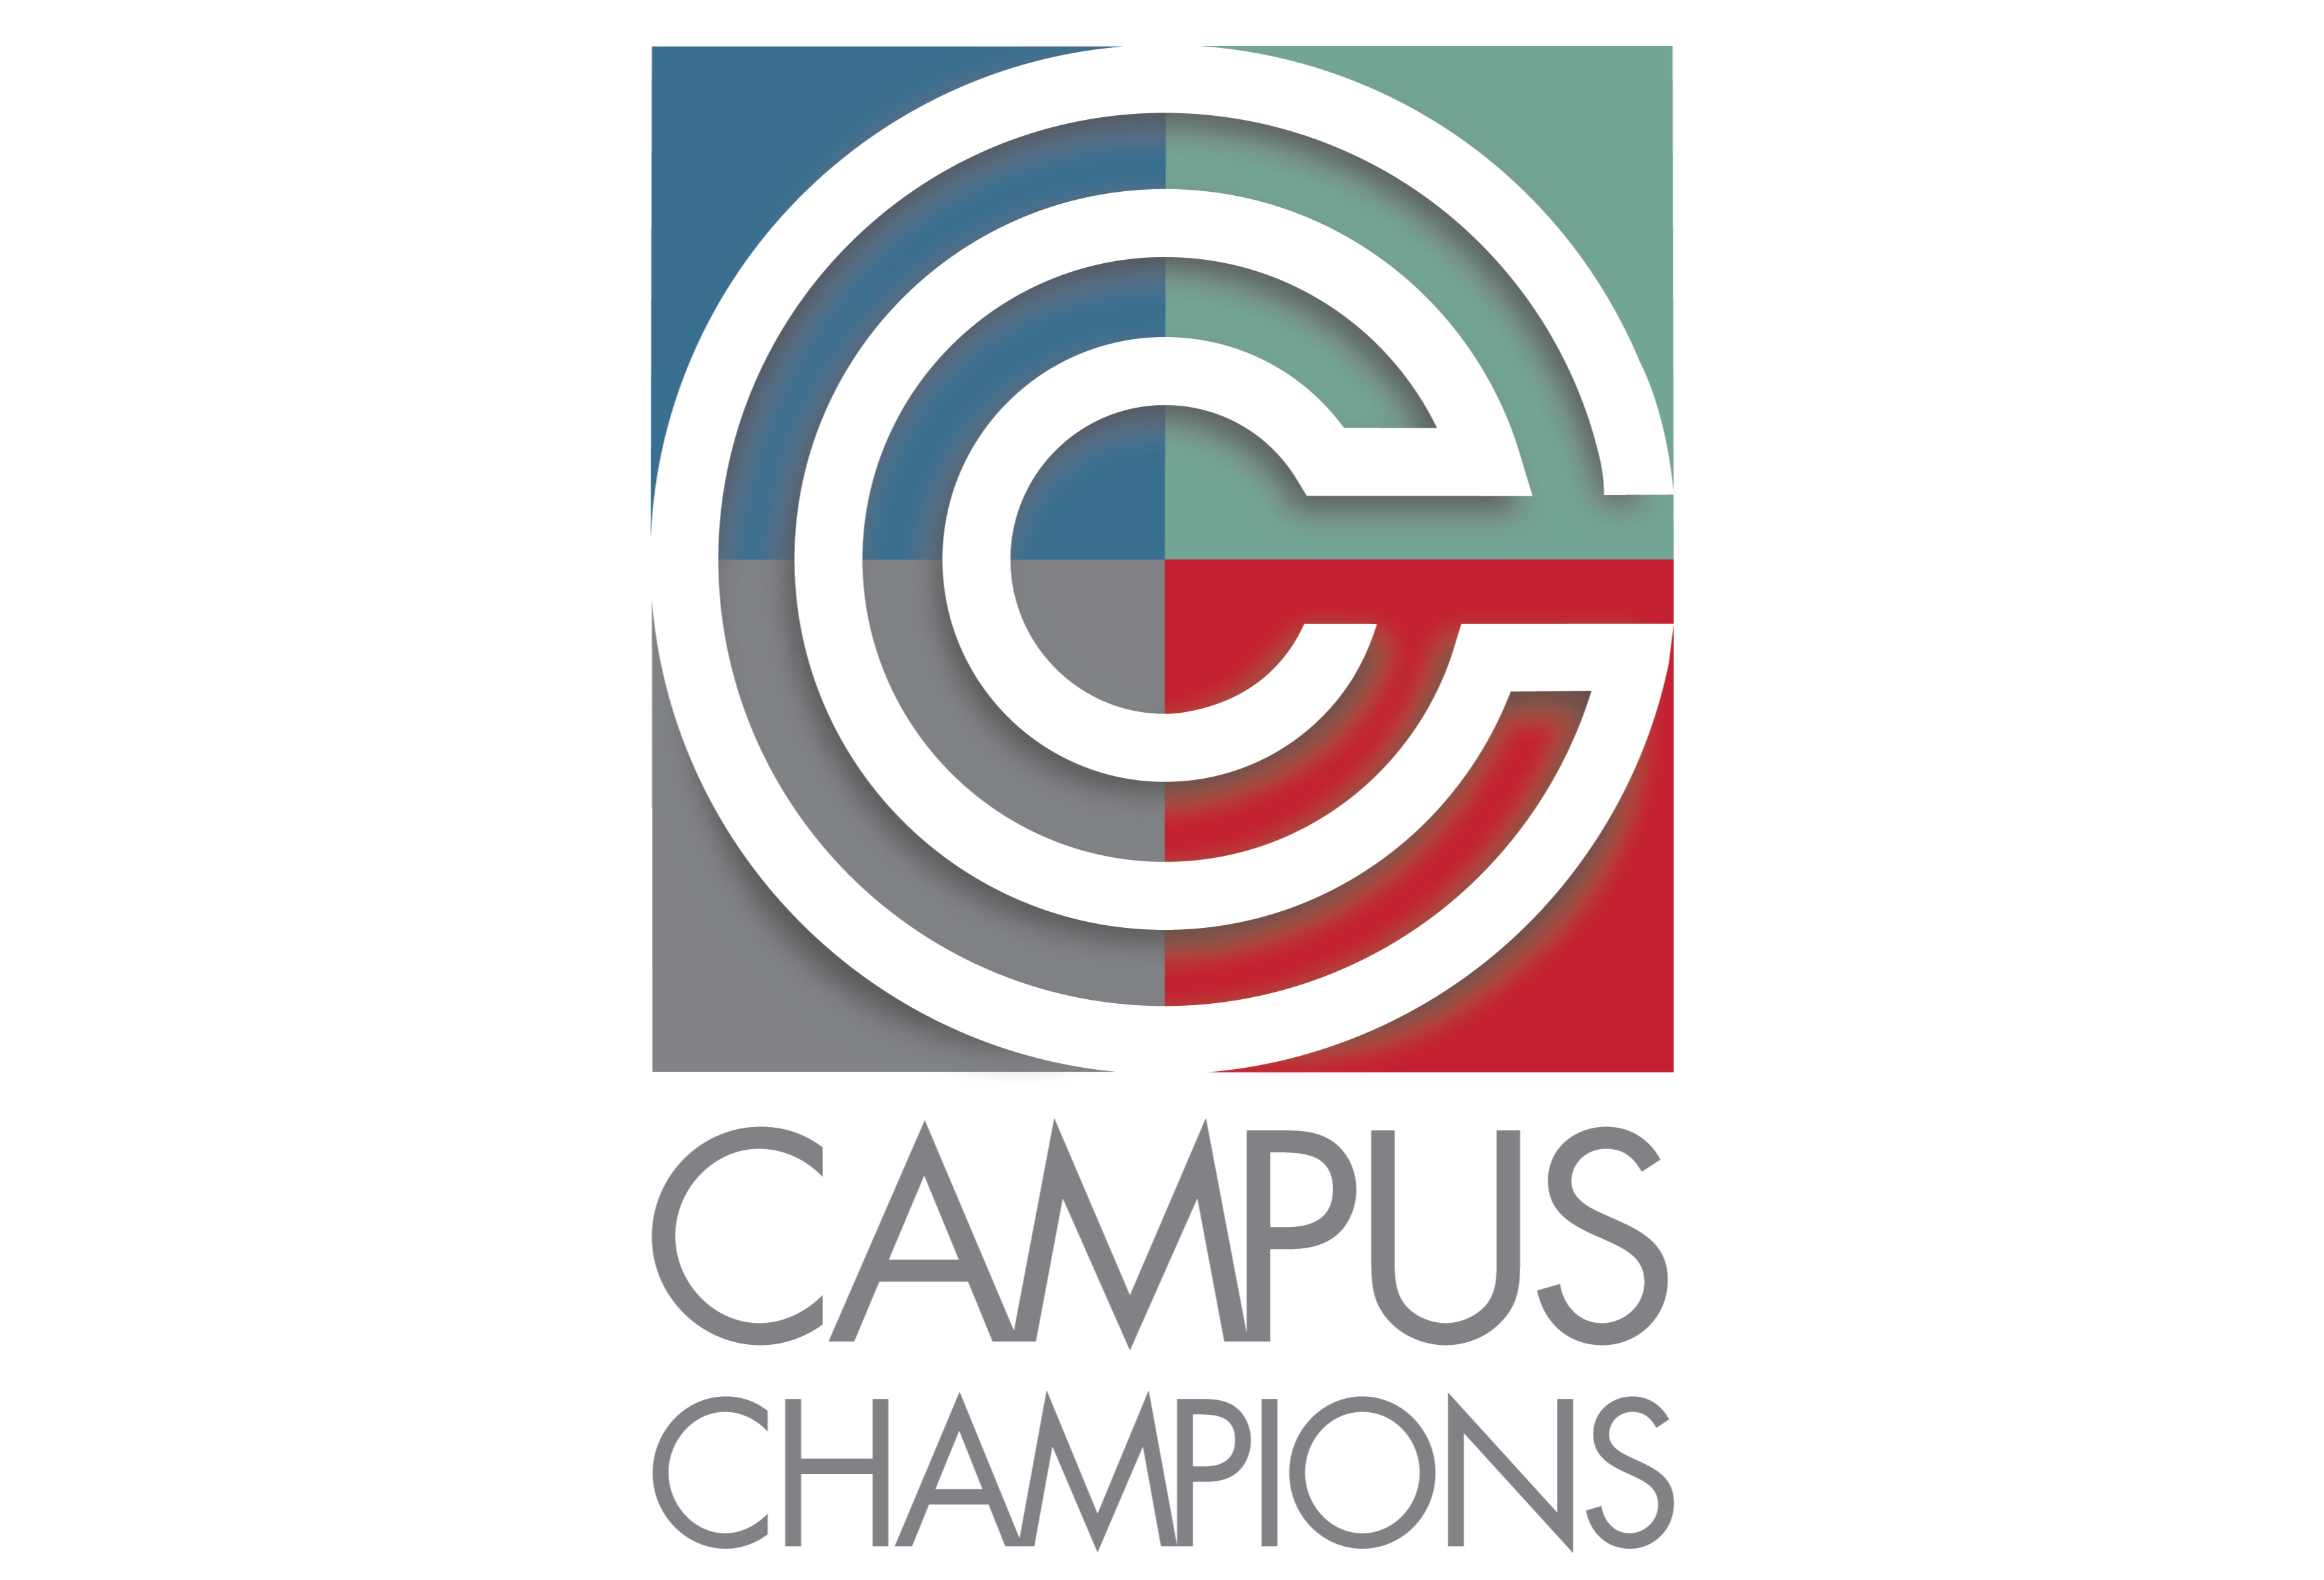 The words Campus Champions next to the letter C